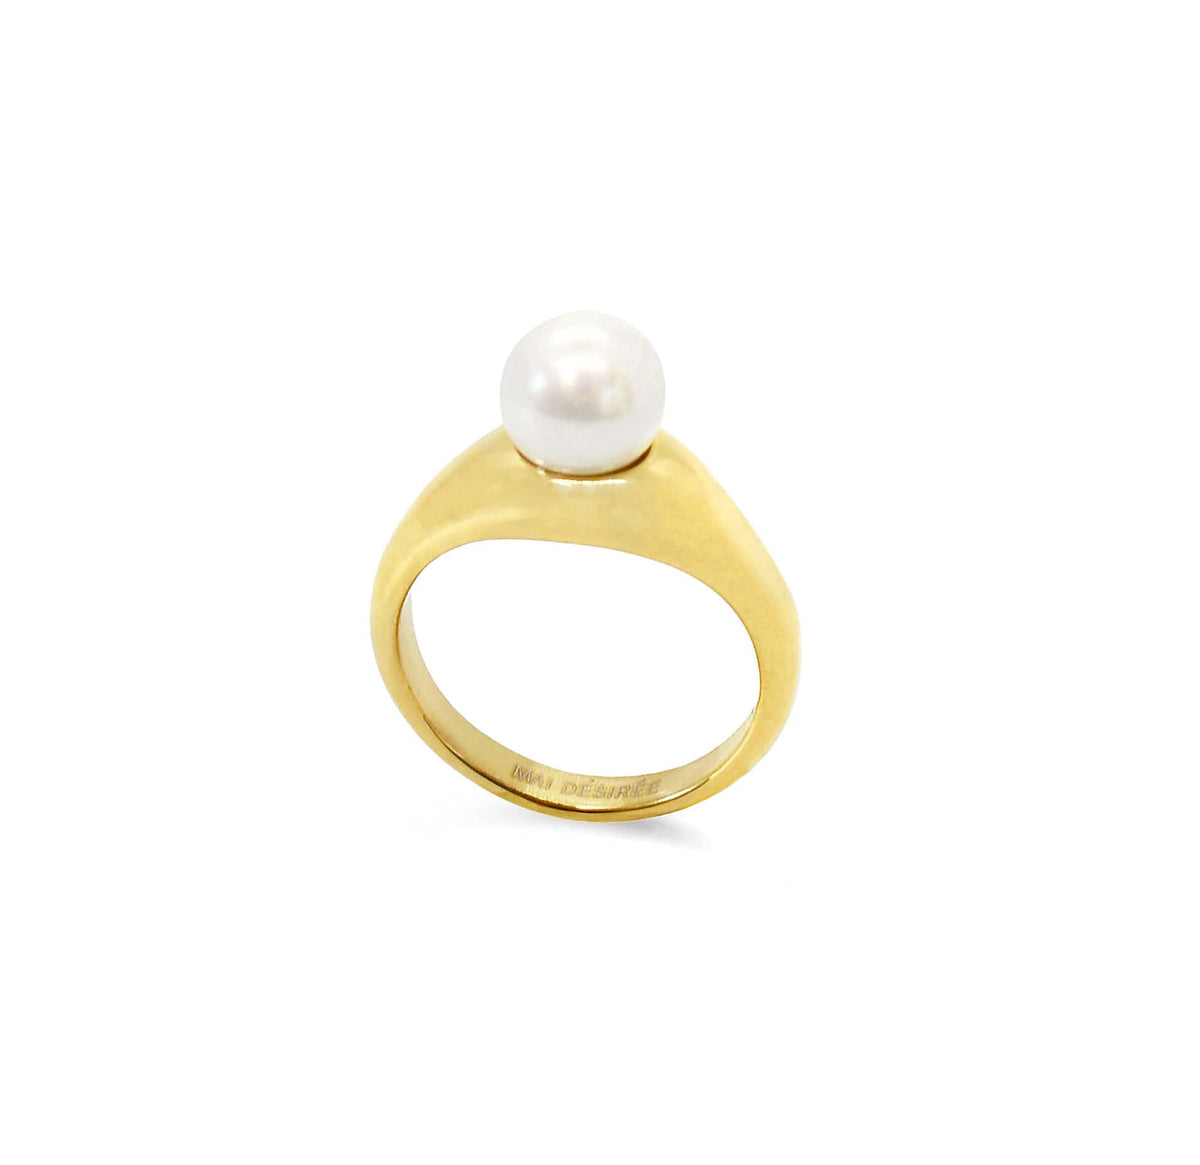 GOLD PEARL RING SAMPLE